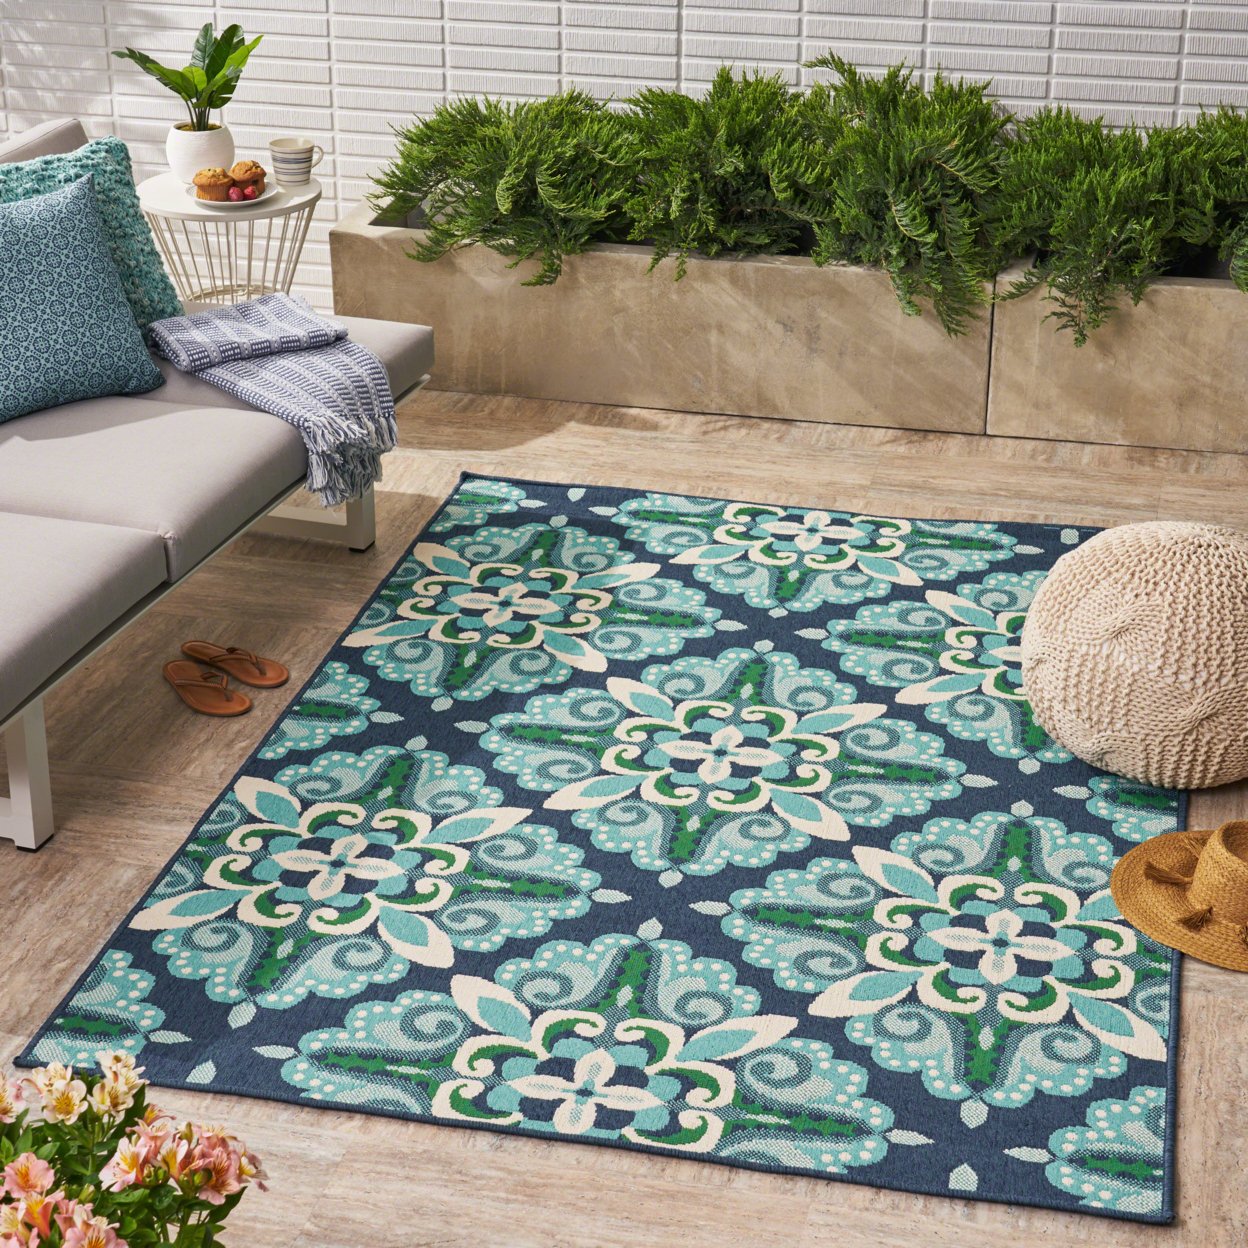 Sage Outdoor Floral Area Rug - 6'7 X 9'2, Blue/Green